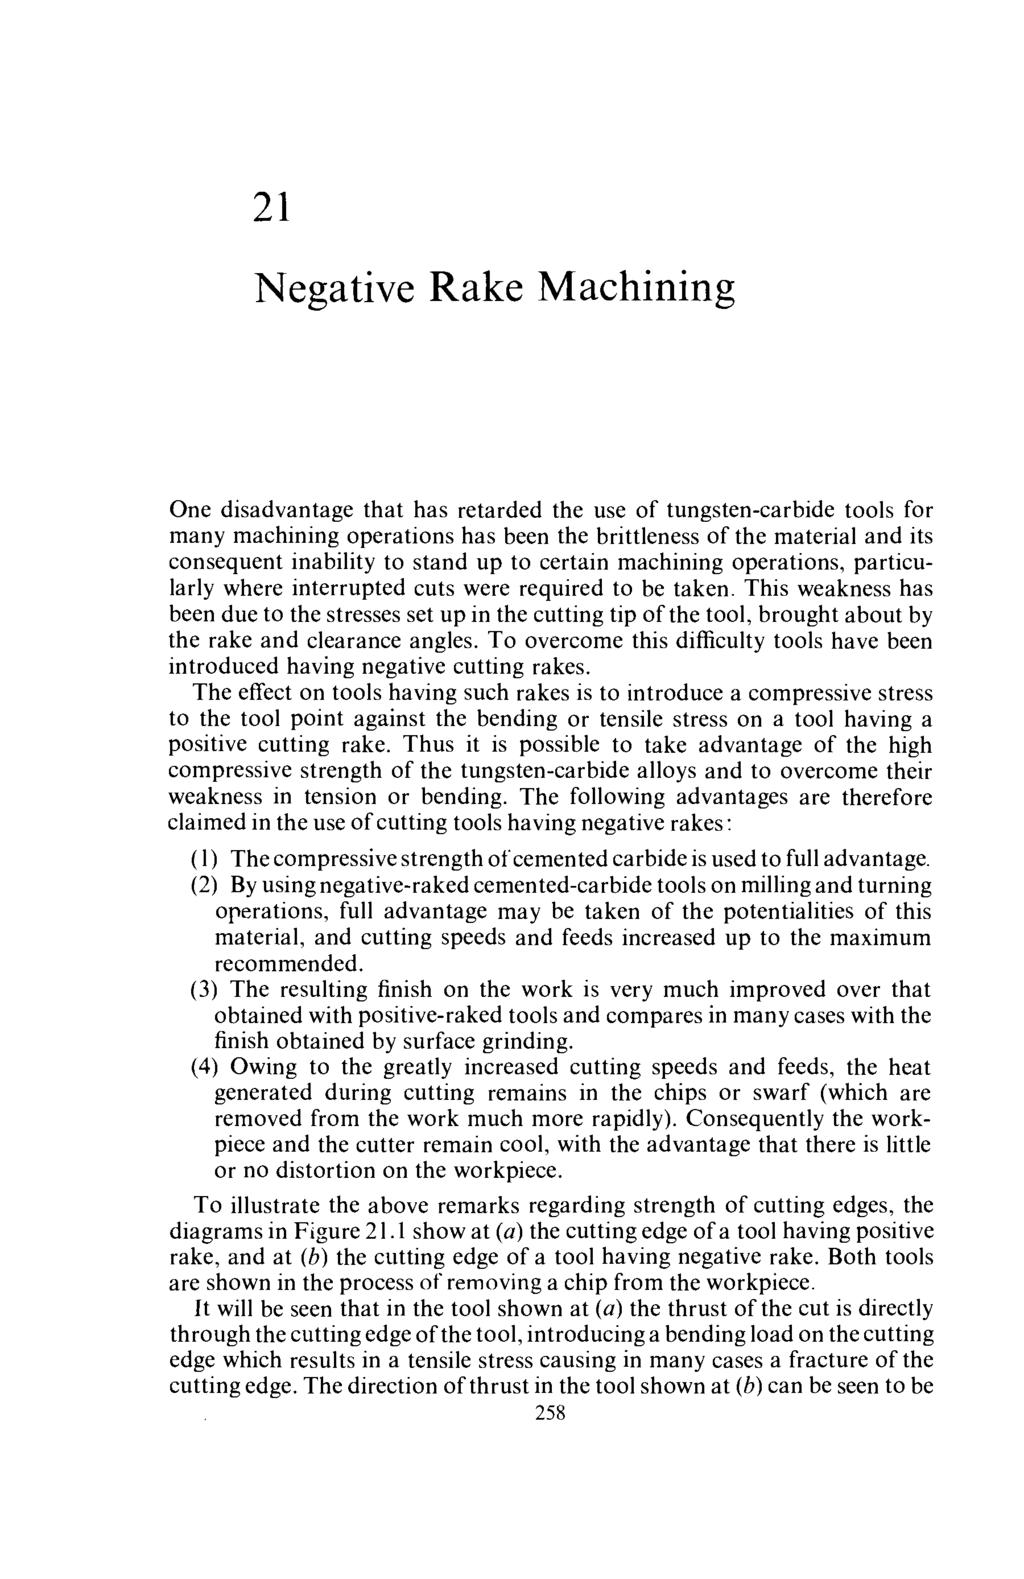 21 Negative Rake Machining One disadvantage that has retarded the use of tungsten-carbide tools for many machining operations has been the brittleness of the material and its consequent inability to